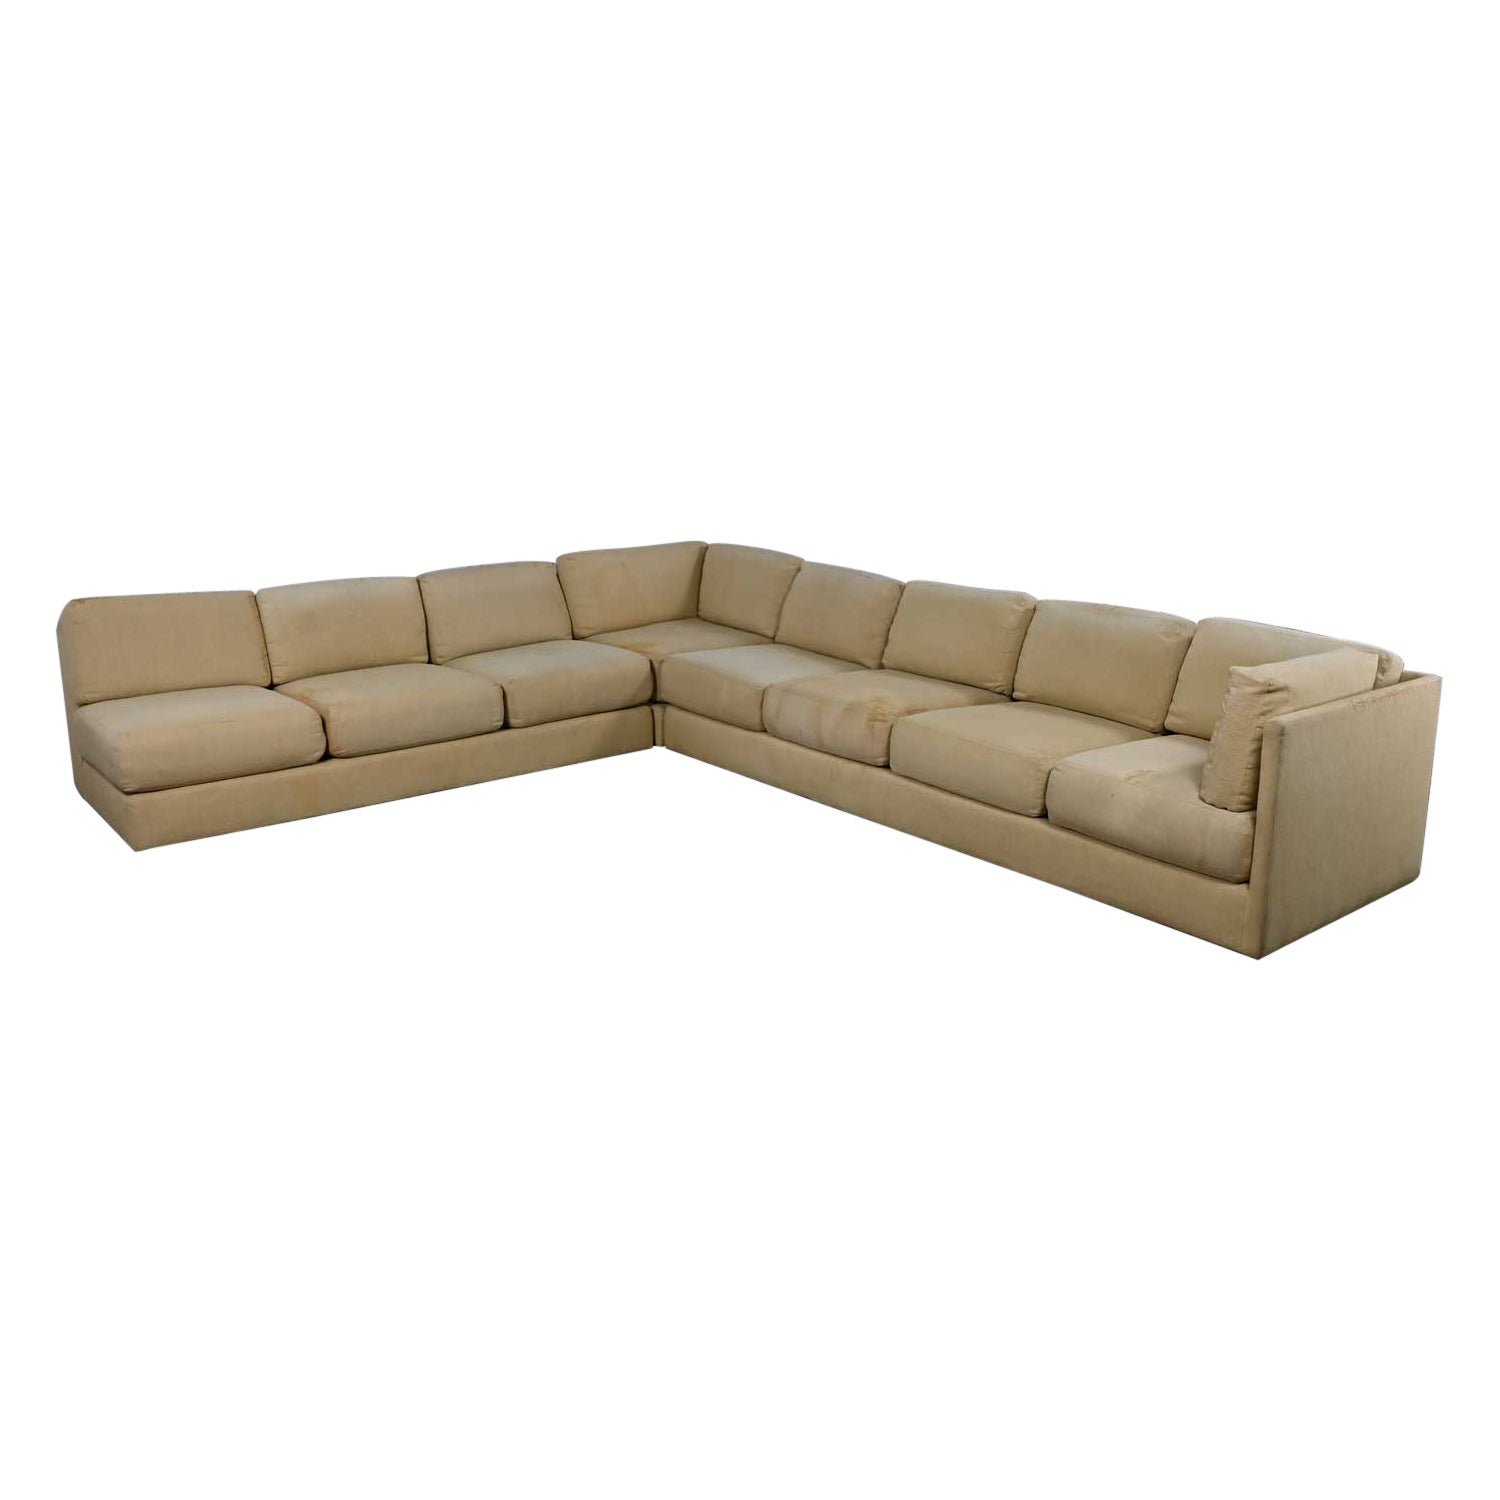 MCM to Modern Tuxedo Style 3 Piece Sectional Sofa by Classic Gallery Frame Only For Sale